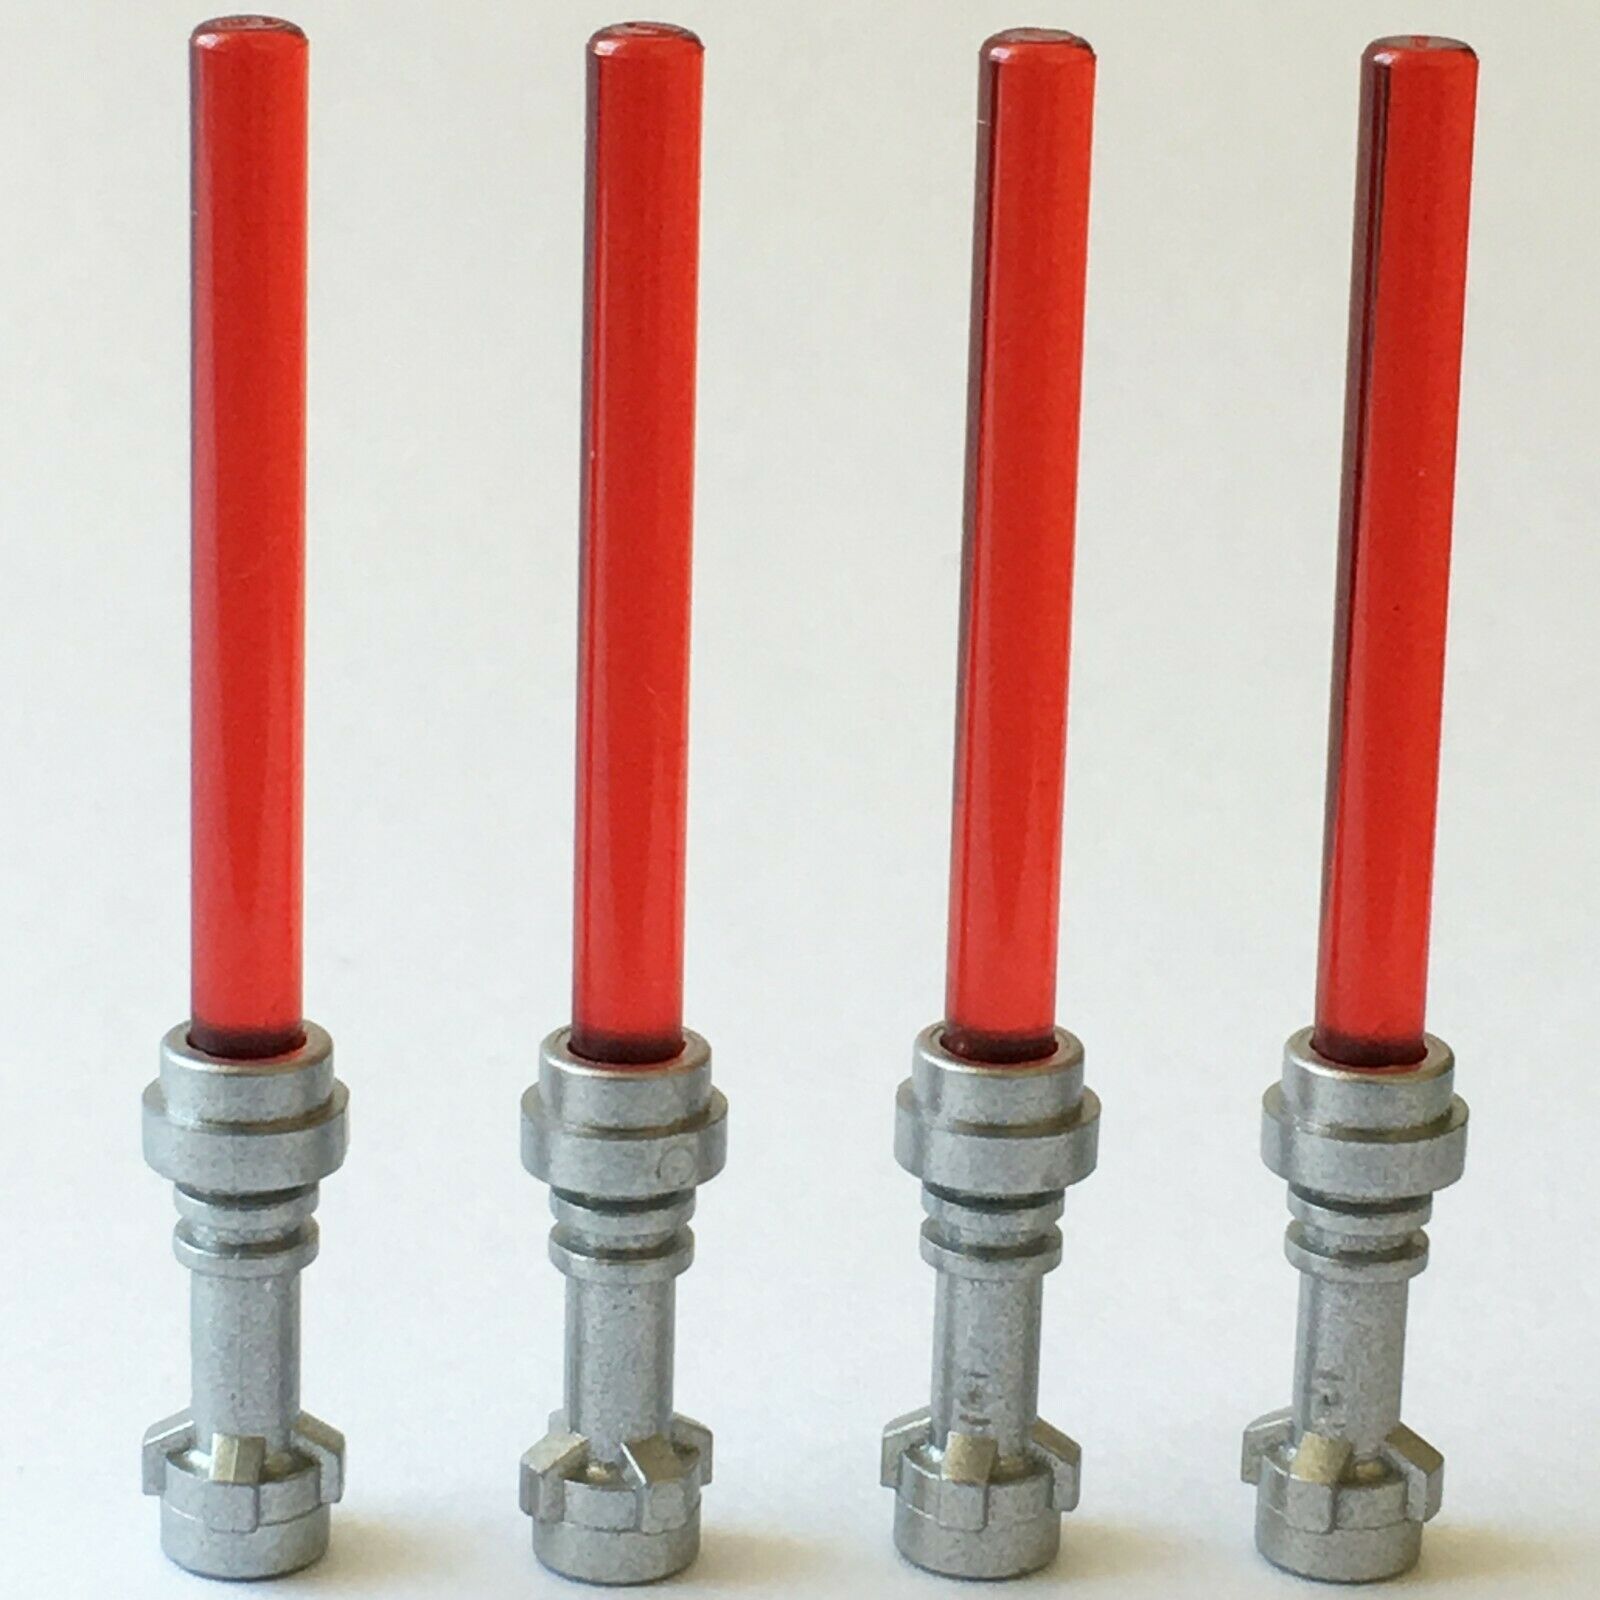 4 x Star Wars LEGO Red Lightsabers Jedi & Sith Minifigure Weapons Parts Genuine - Bricks & Figures